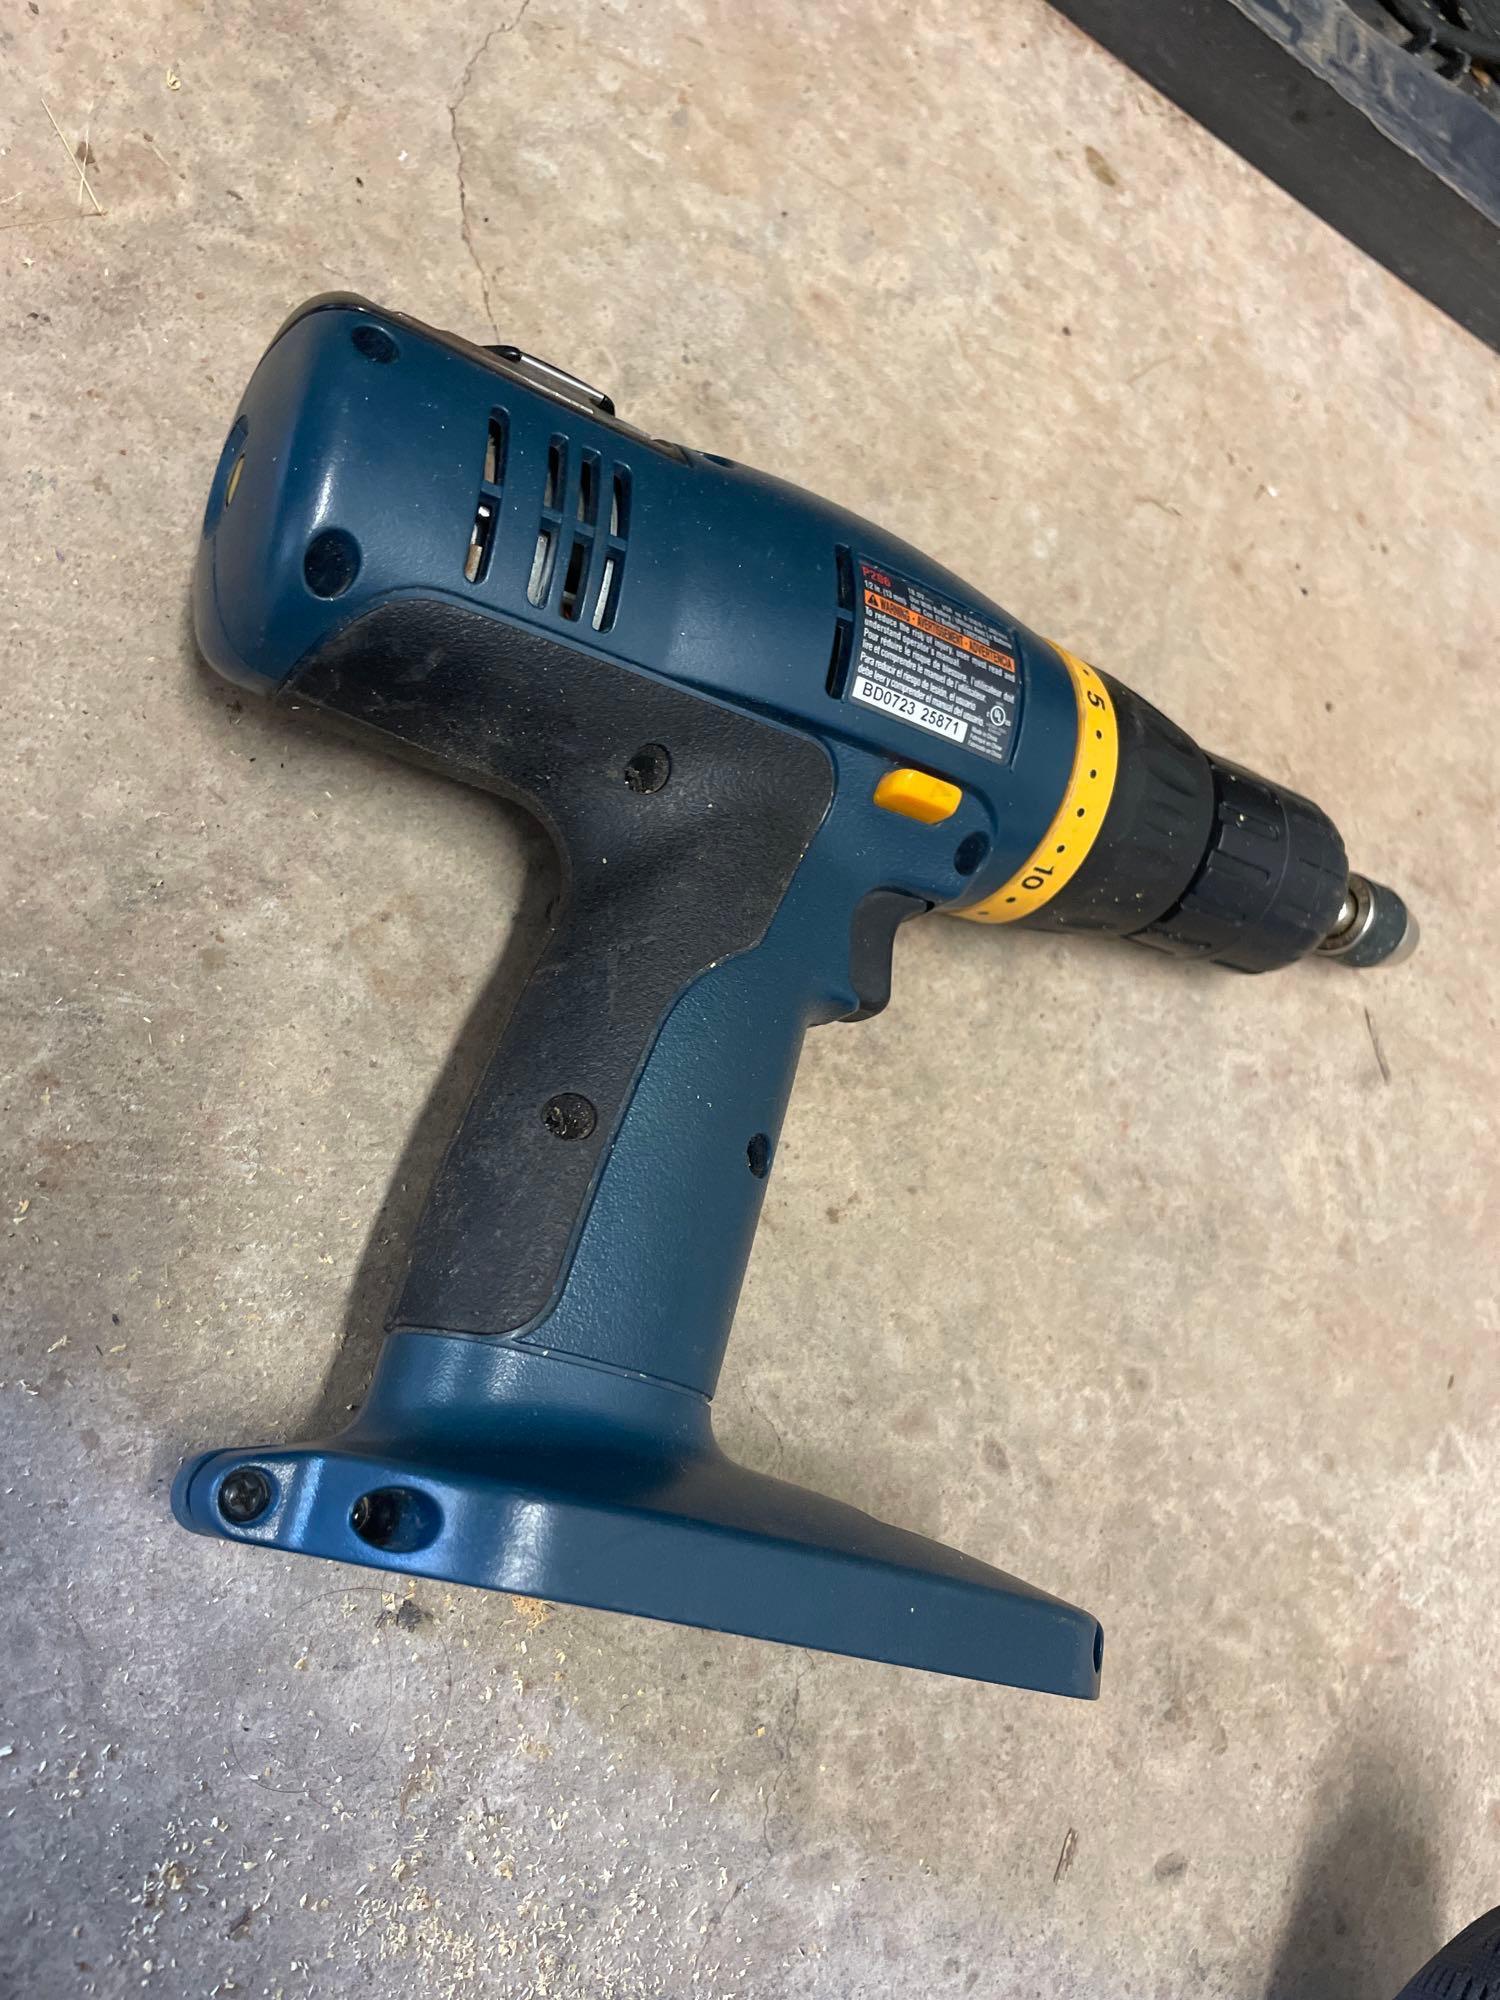 handsaw; power drill; battery charger; batteries